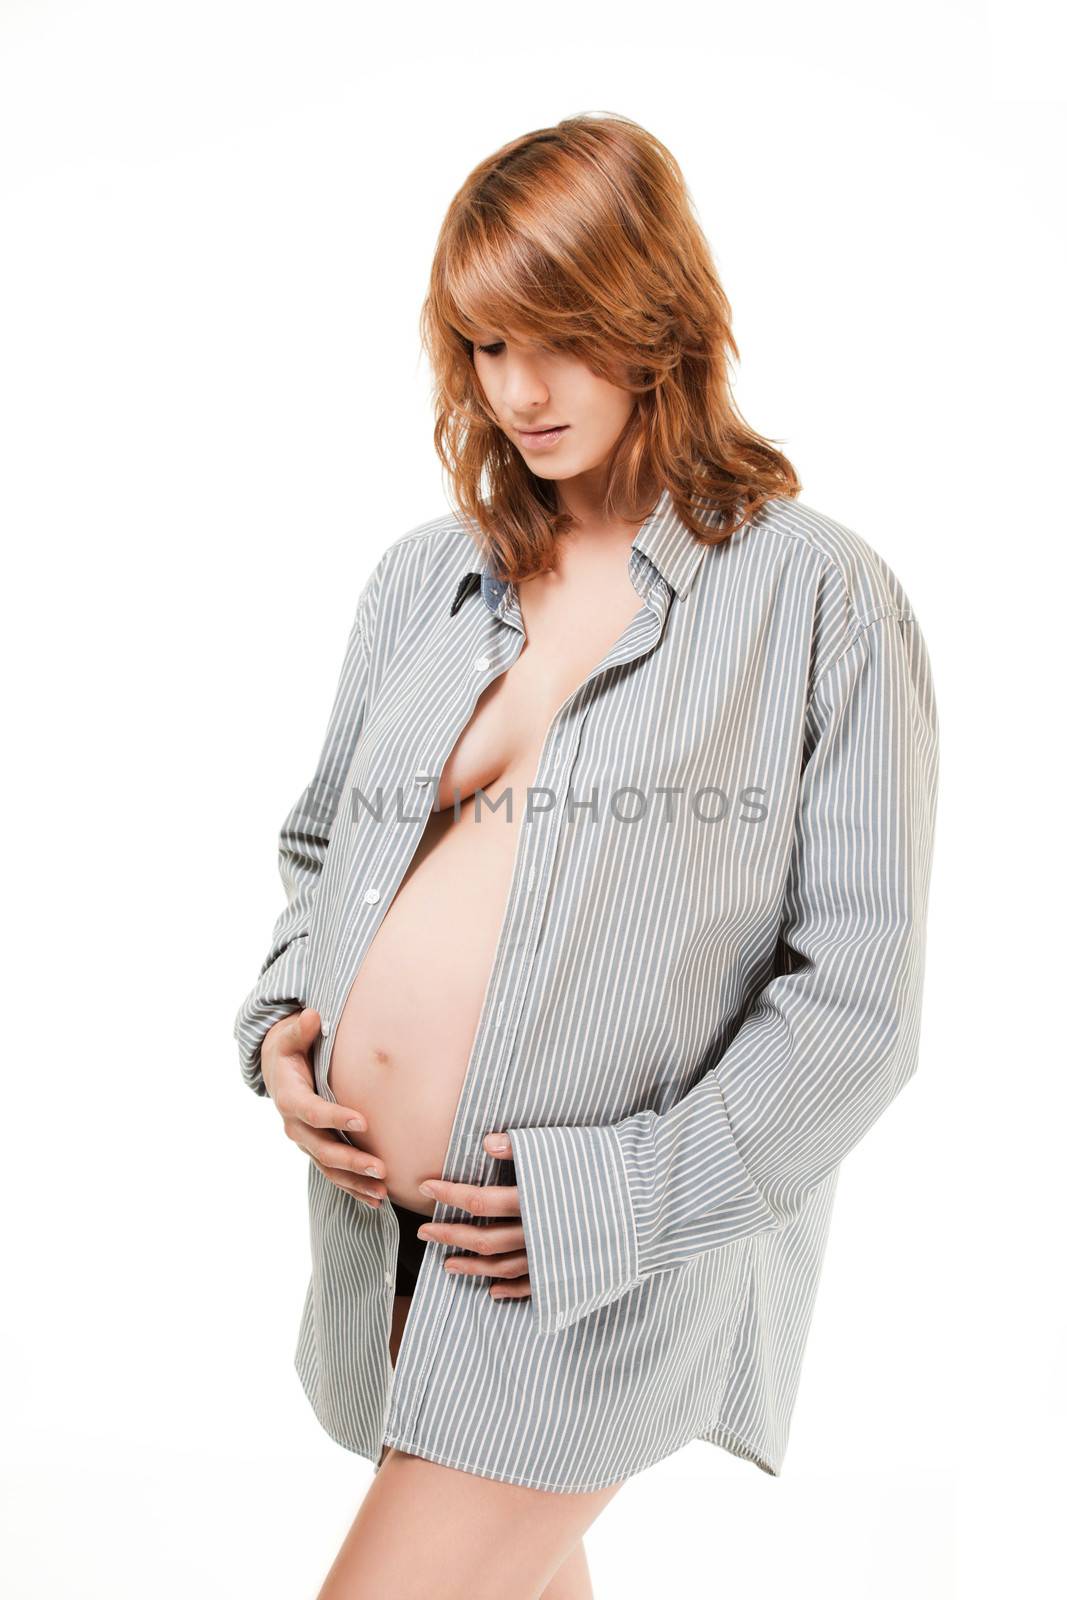 Pregnant woman looking down hands holding her tummy isolated on white